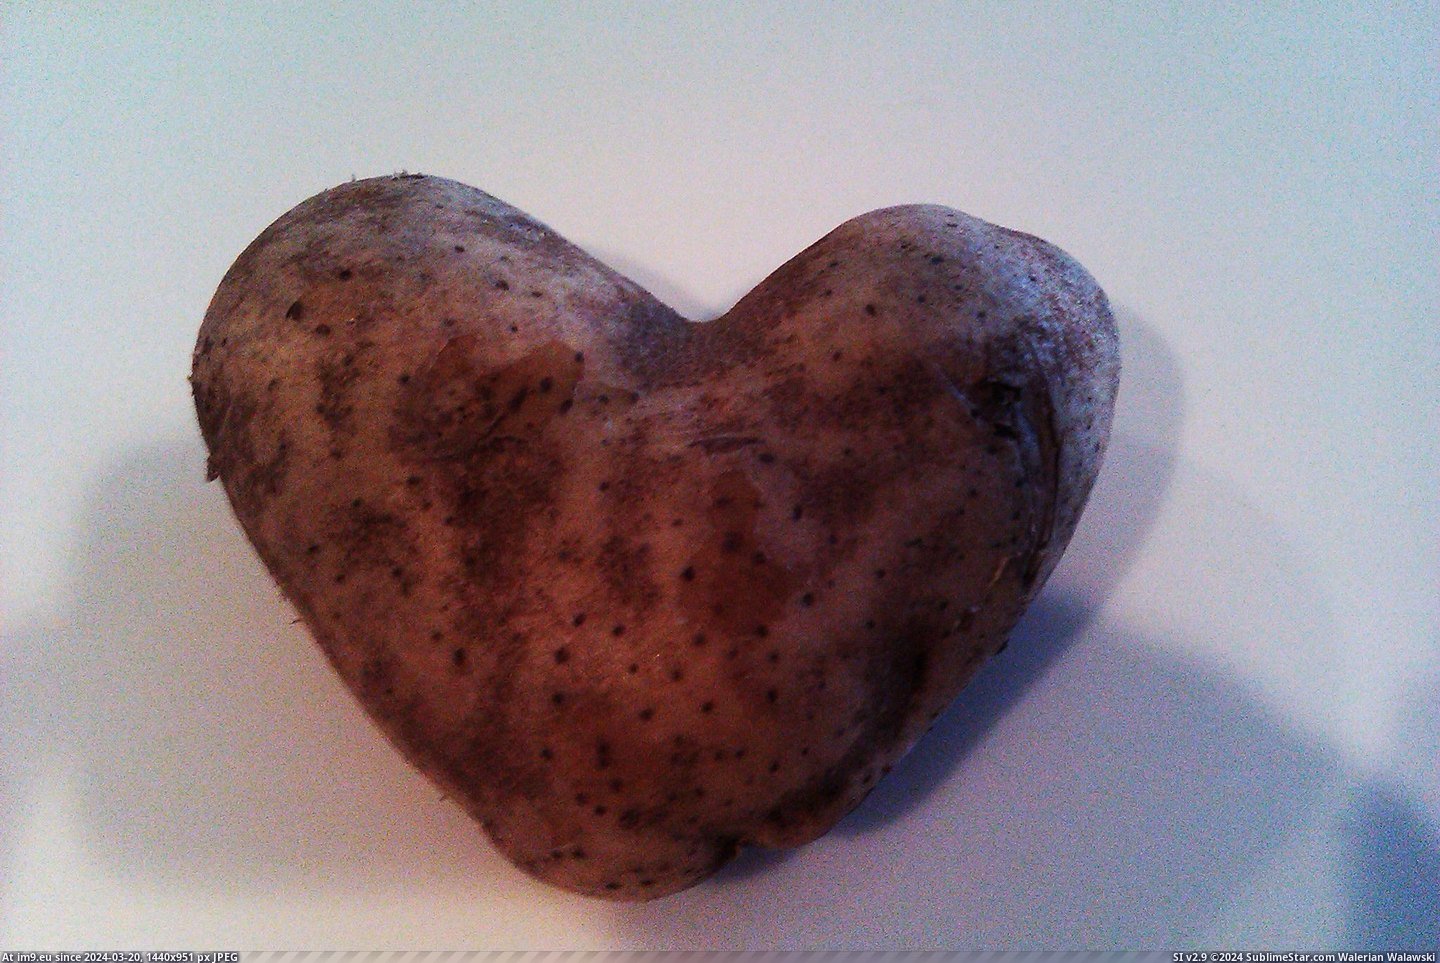 #One #Two #Potatoes #Fused #Heart #Kind [Mildlyinteresting] I found two potatoes fused into one and it looks kind of like a heart I think? Pic. (Bild von album My r/MILDLYINTERESTING favs))